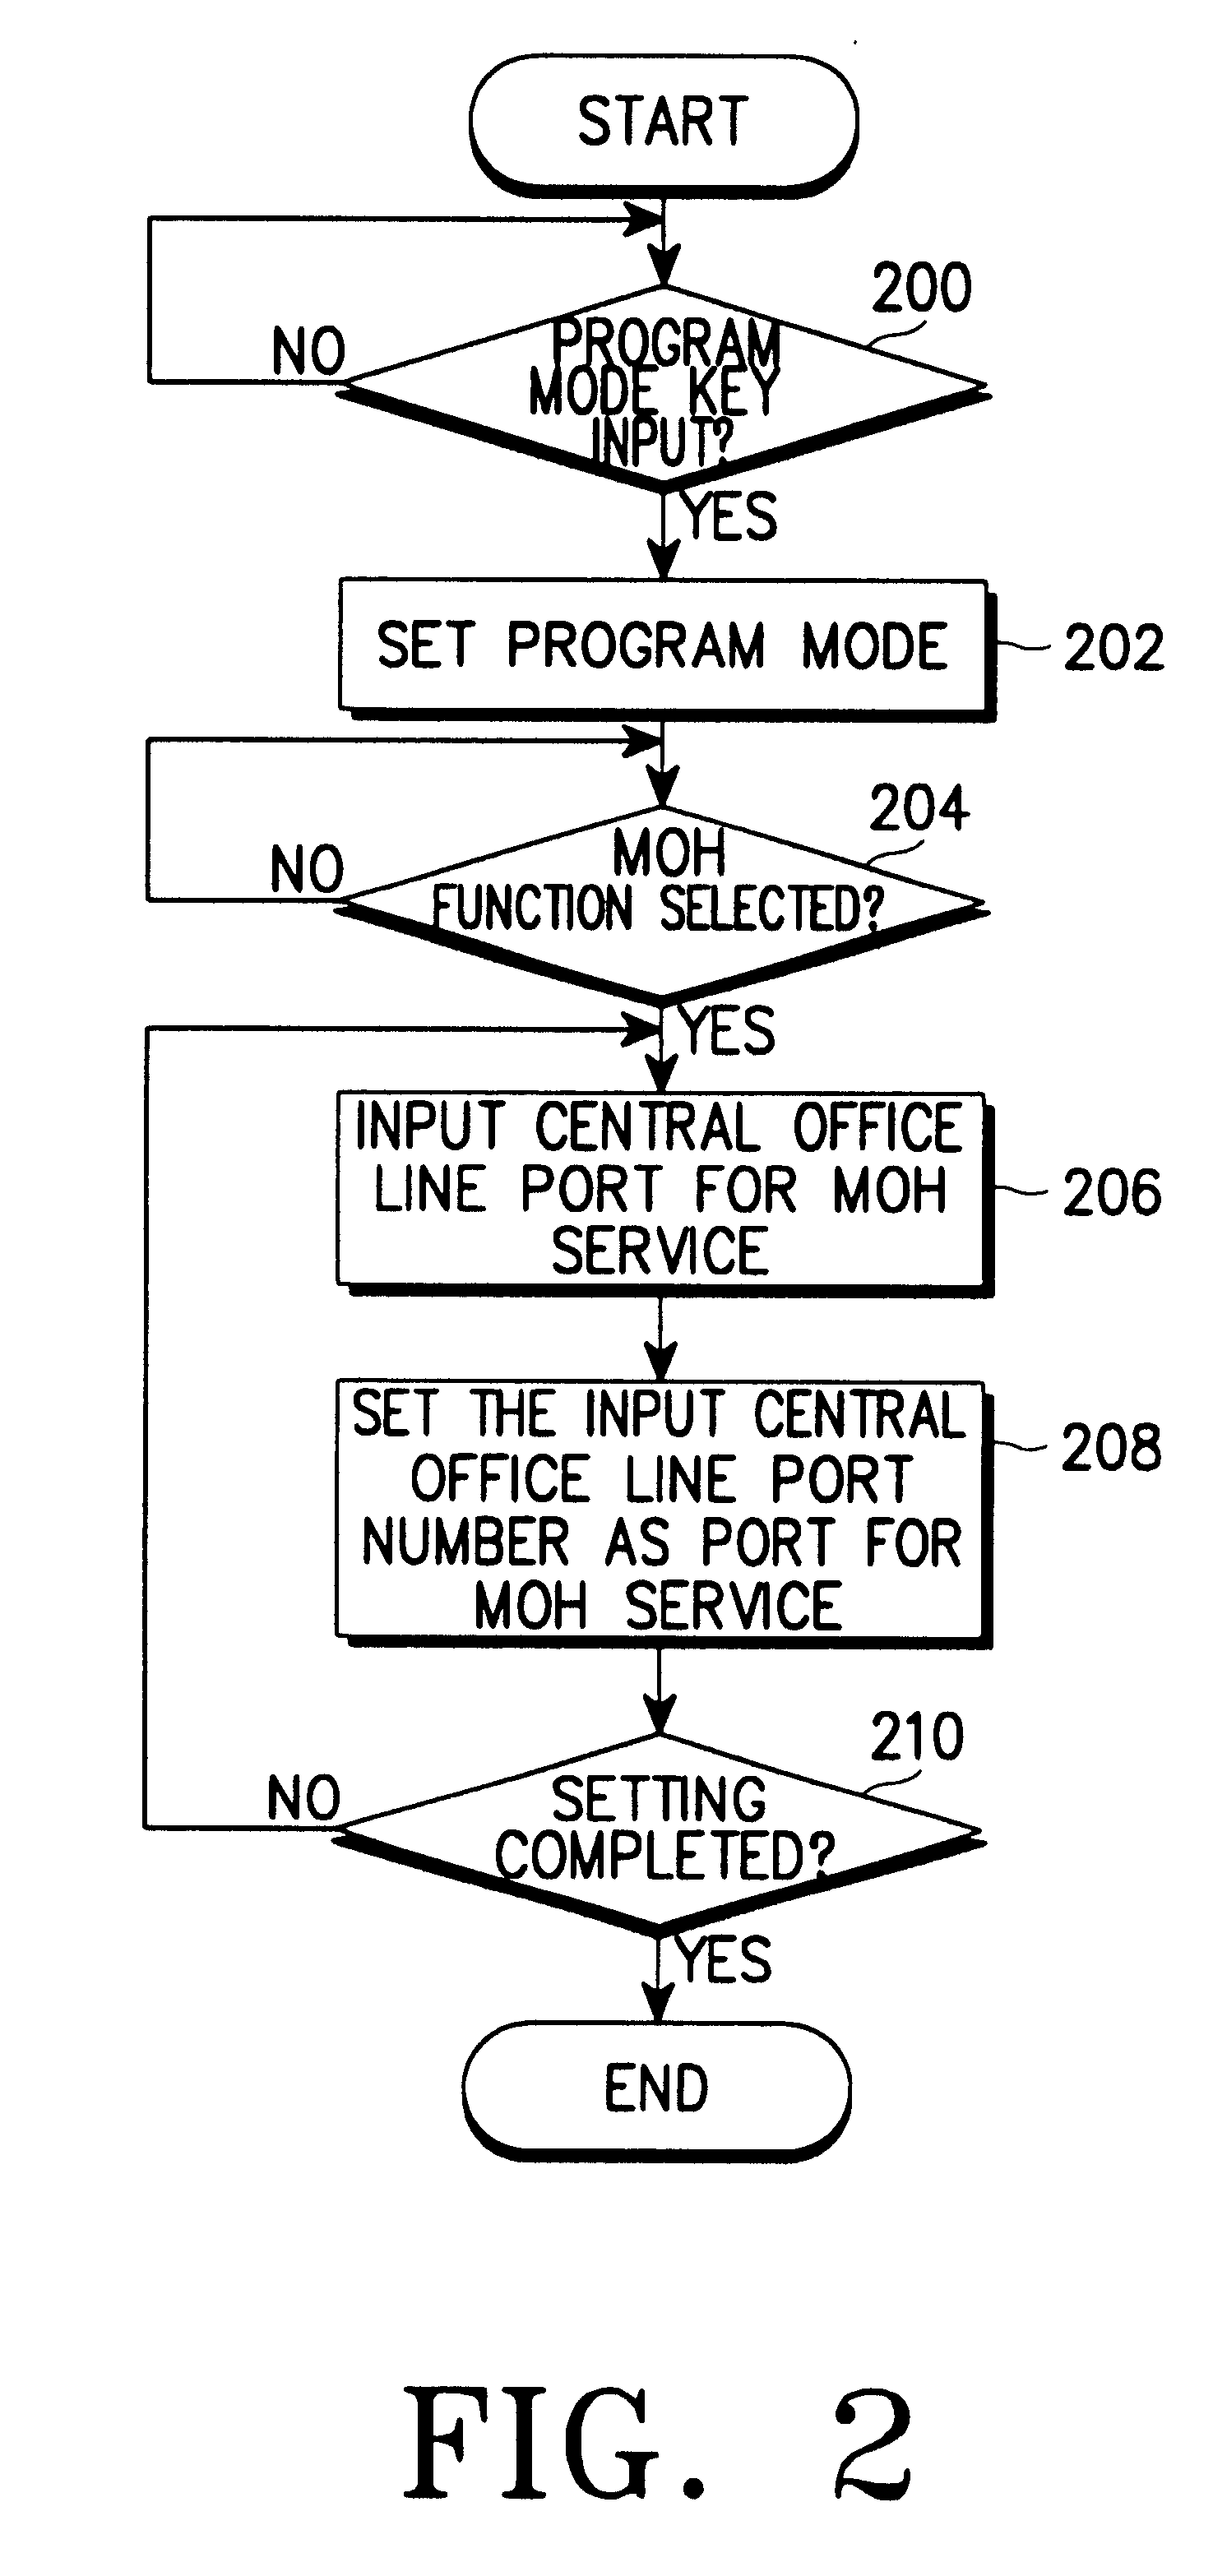 Apparatus and method for providing music-on-hold service in key telephone system